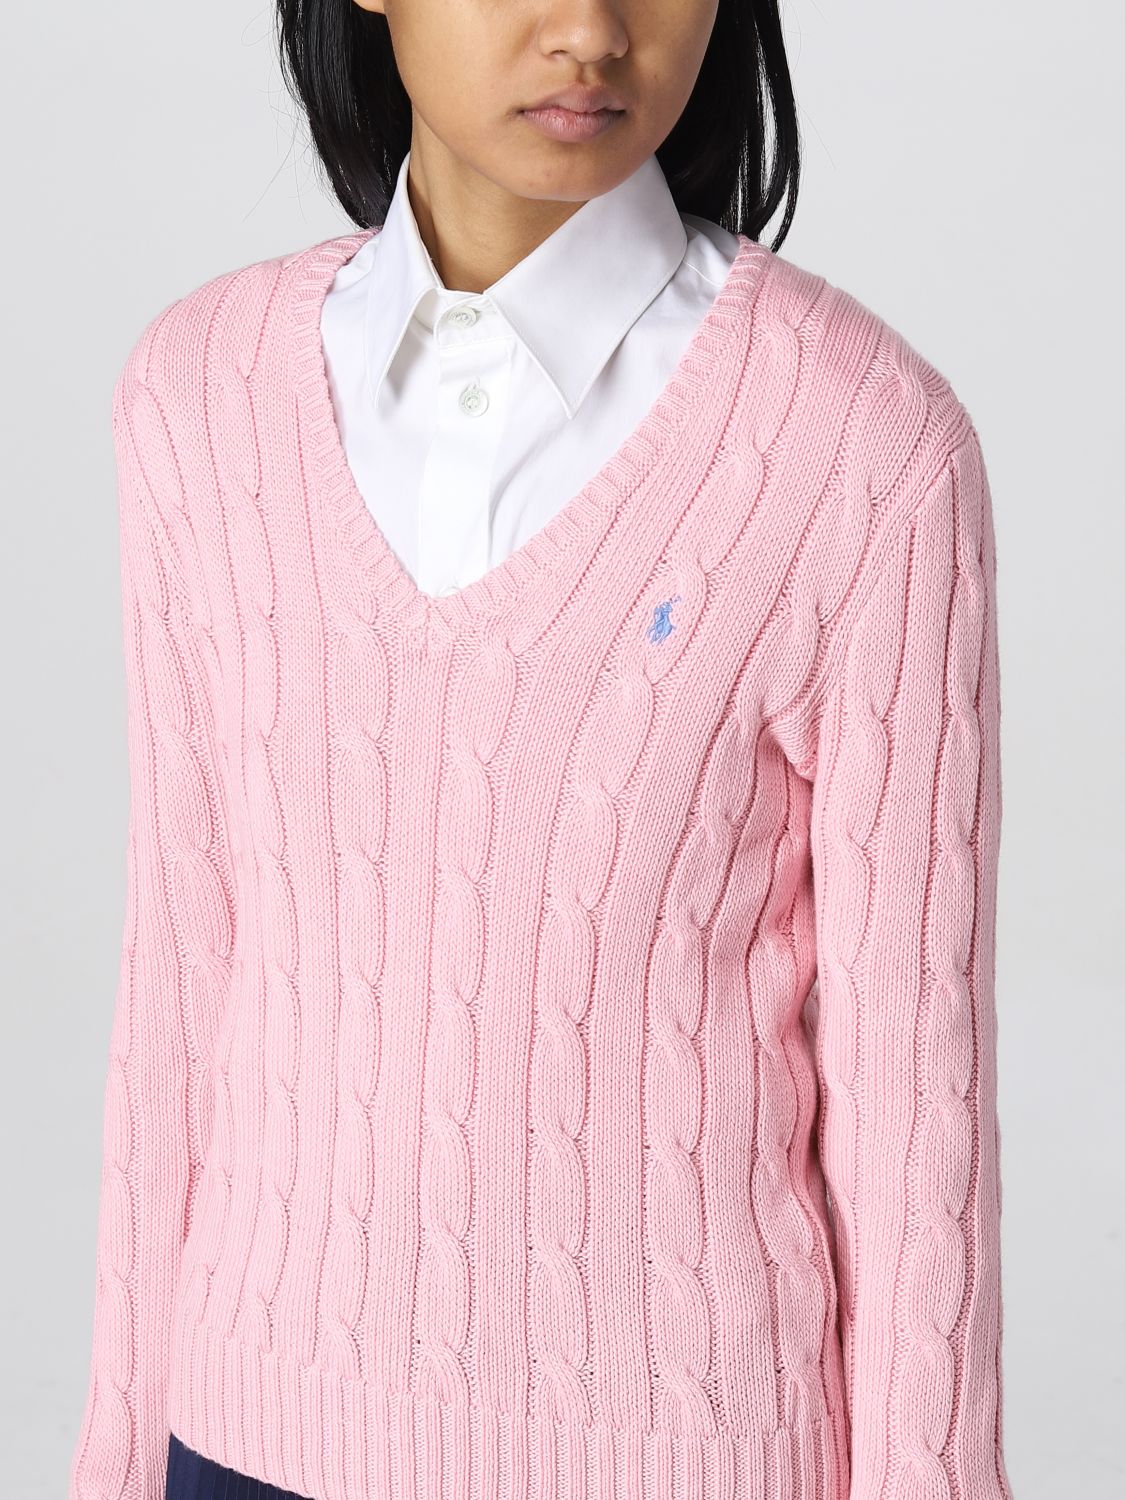 POLO RALPH LAUREN: sweater for woman - Pink | Polo Ralph Lauren sweater  211891641 online on 